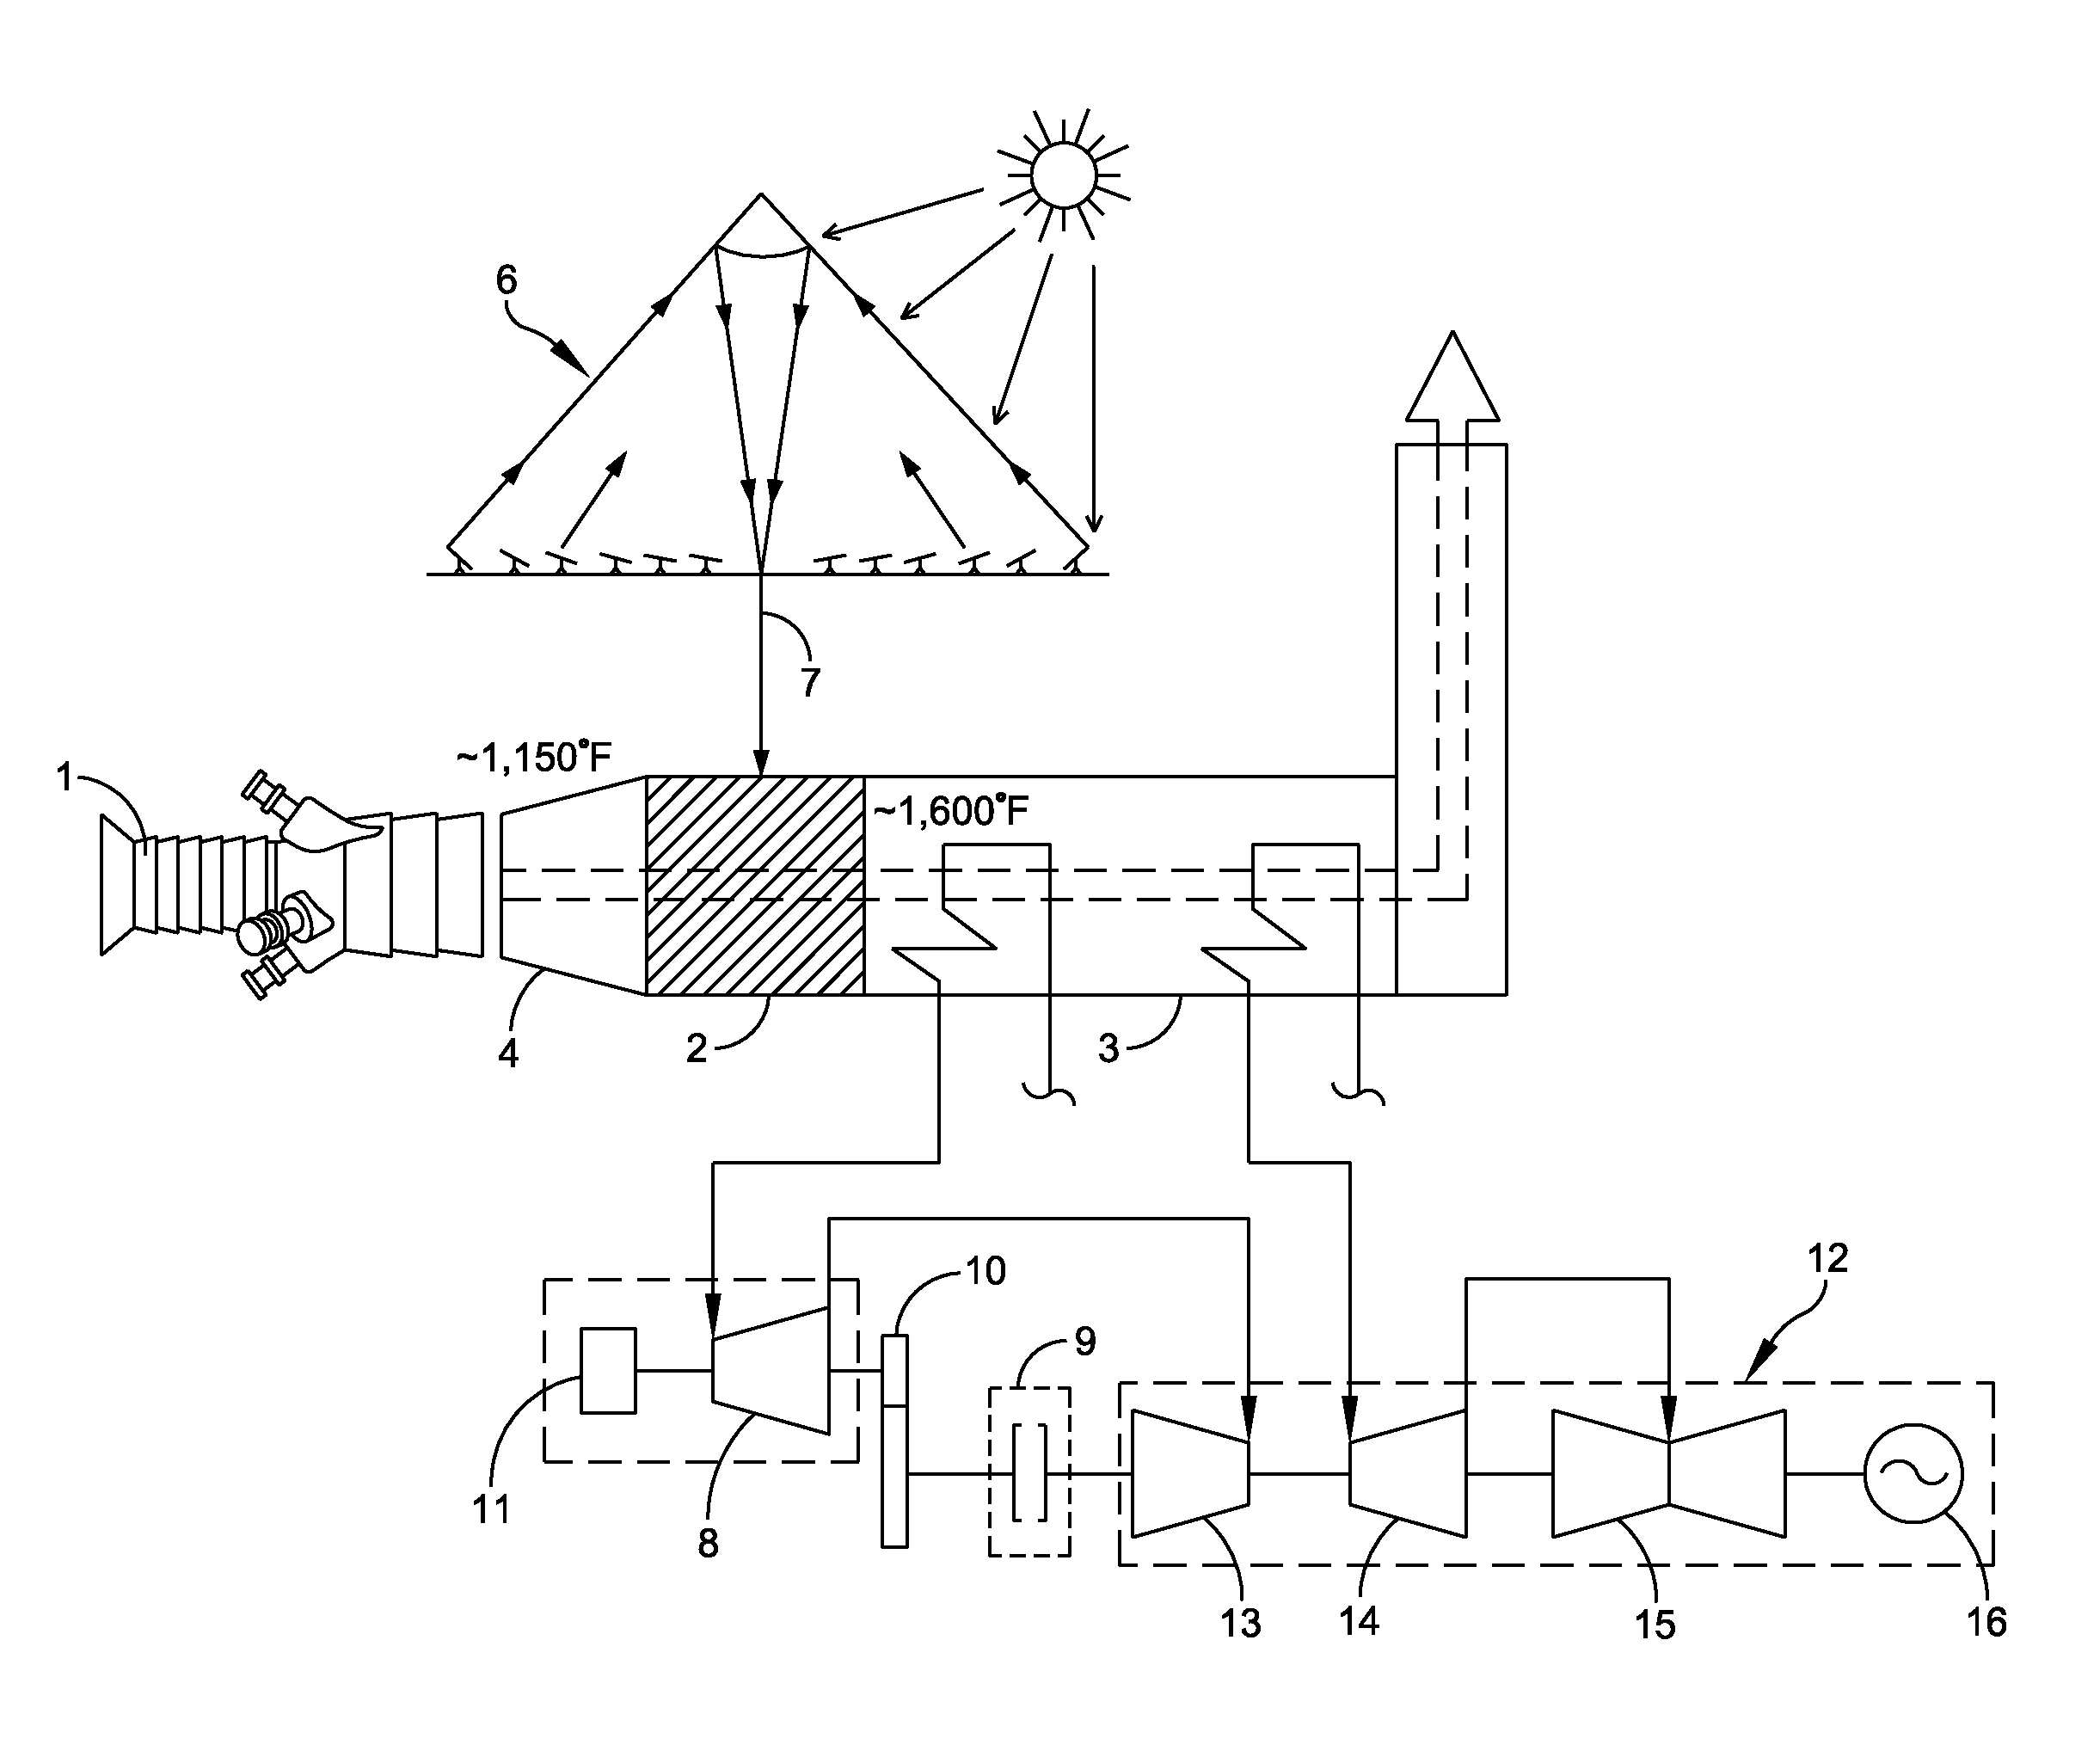 Solar fired combined cycle with supercritical turbine